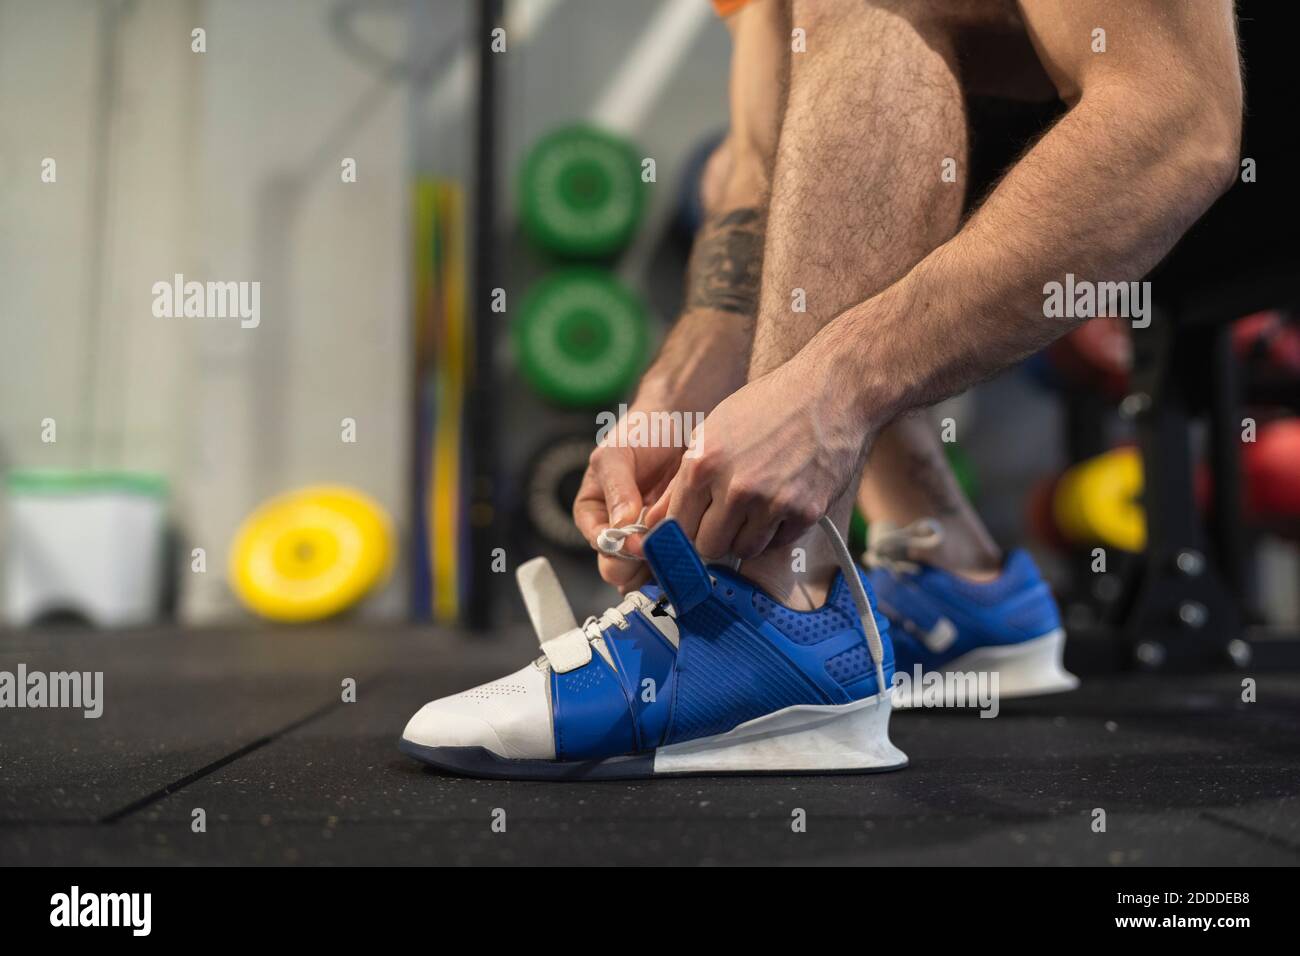 Male athlete tying shoelace while sitting in gym Stock Photo